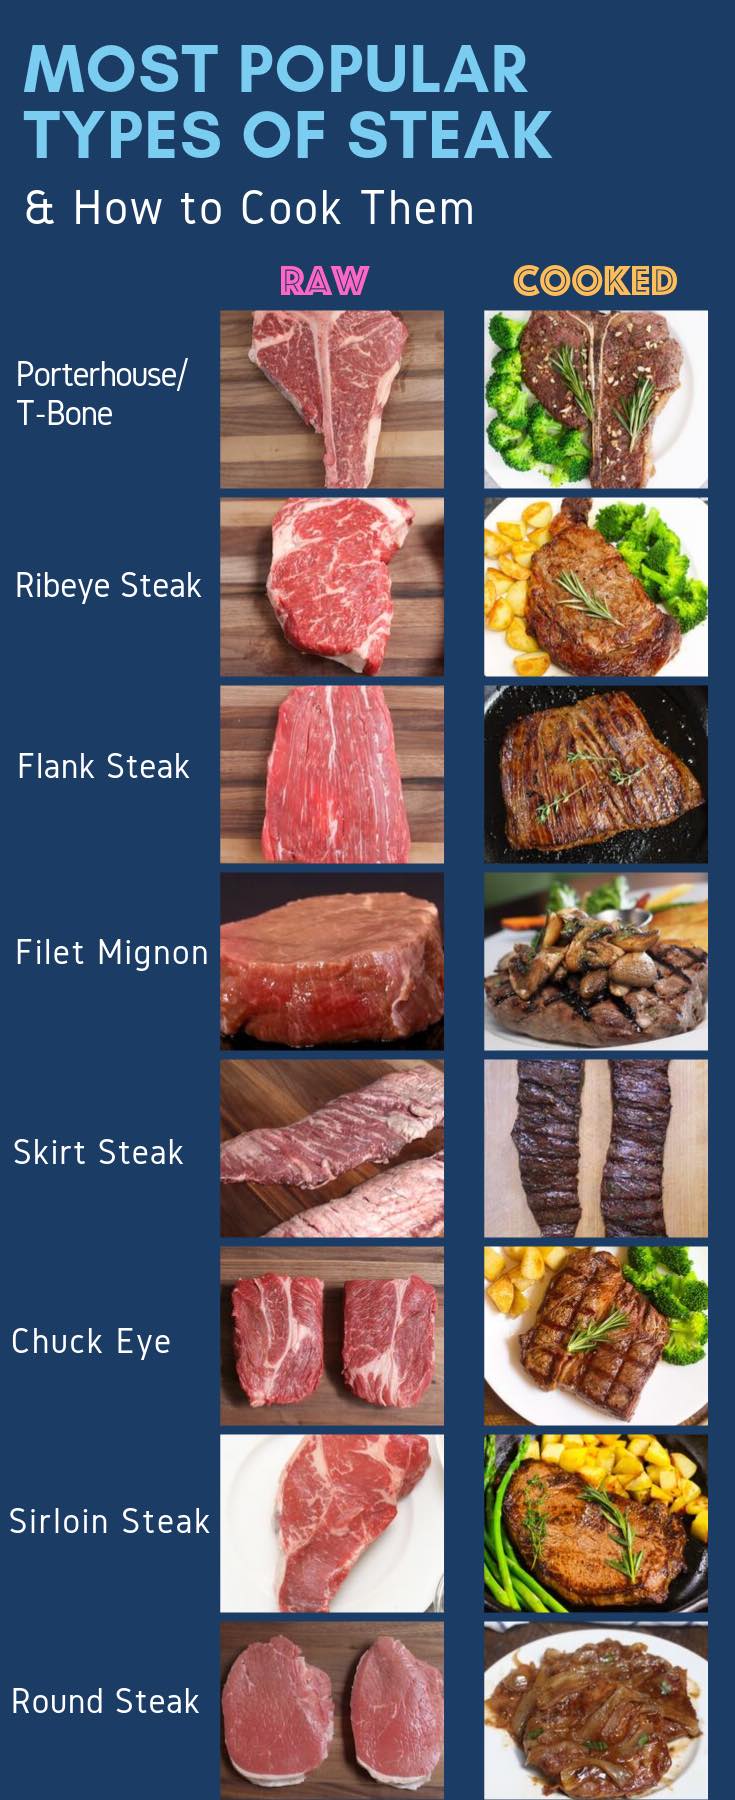 Types of steak: raw and cooked steak of different cuts.